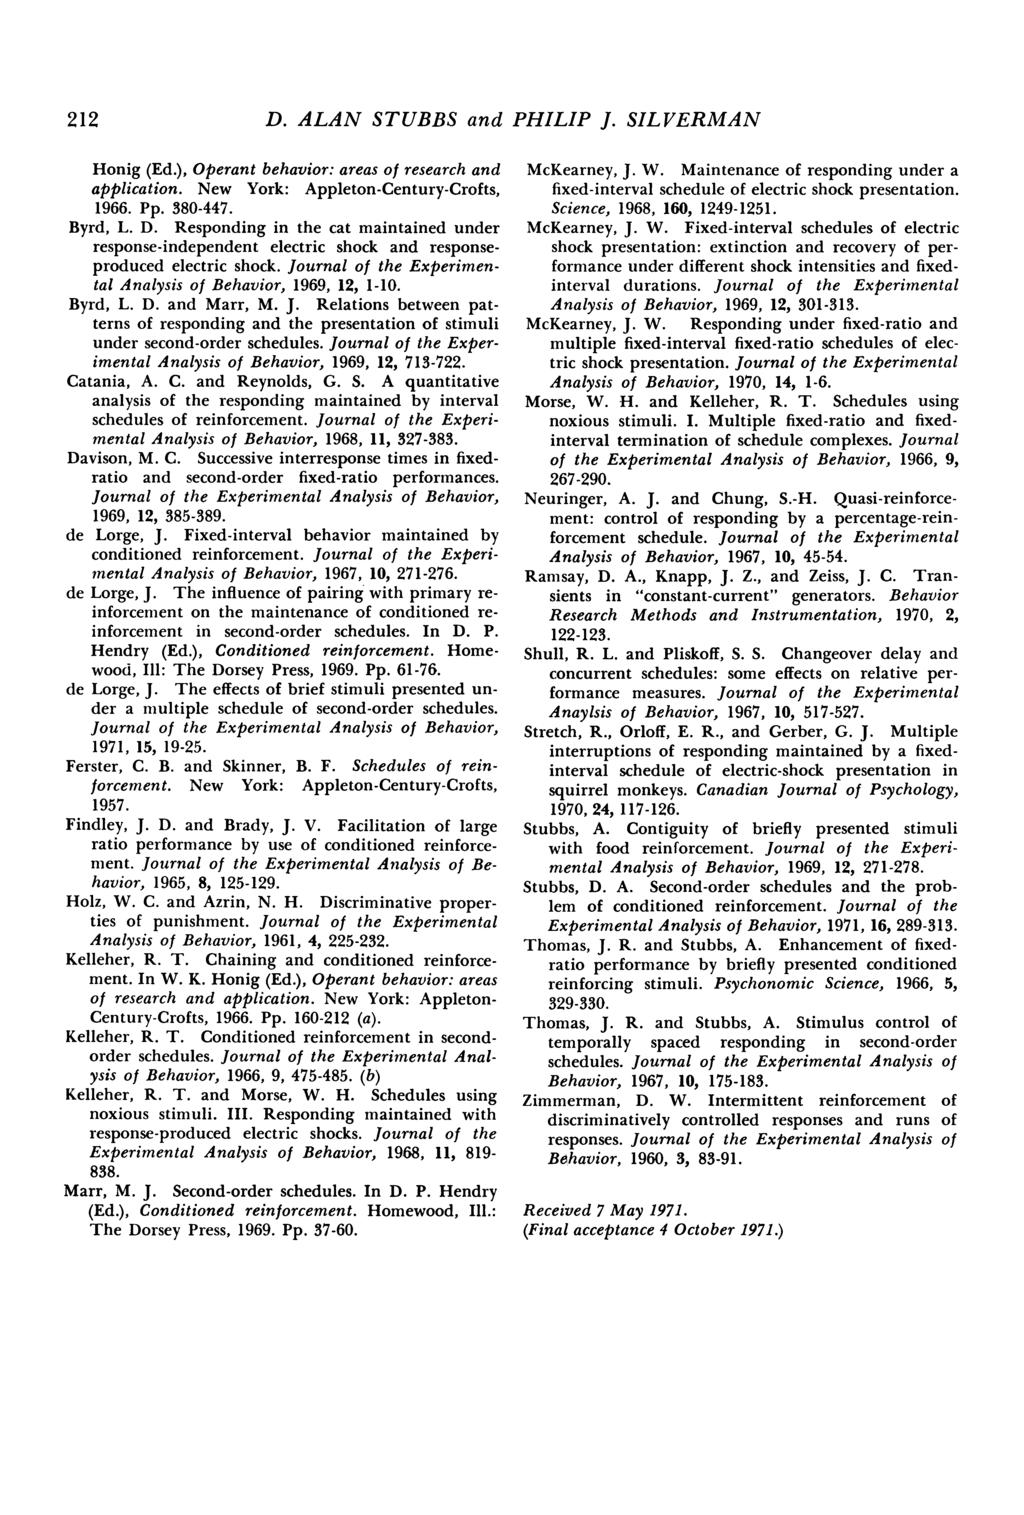 212 D. ALAN STUBBS and PHILIP J. SILVERMAN Honig (Ed.), Operant behavior: areas of research and application. New York: Appleton-Century-Crofts, 1966. Pp. 38-447. Byrd, L. D. Responding in the cat maintained under response-independent electric shock and responseproduced electric shock.